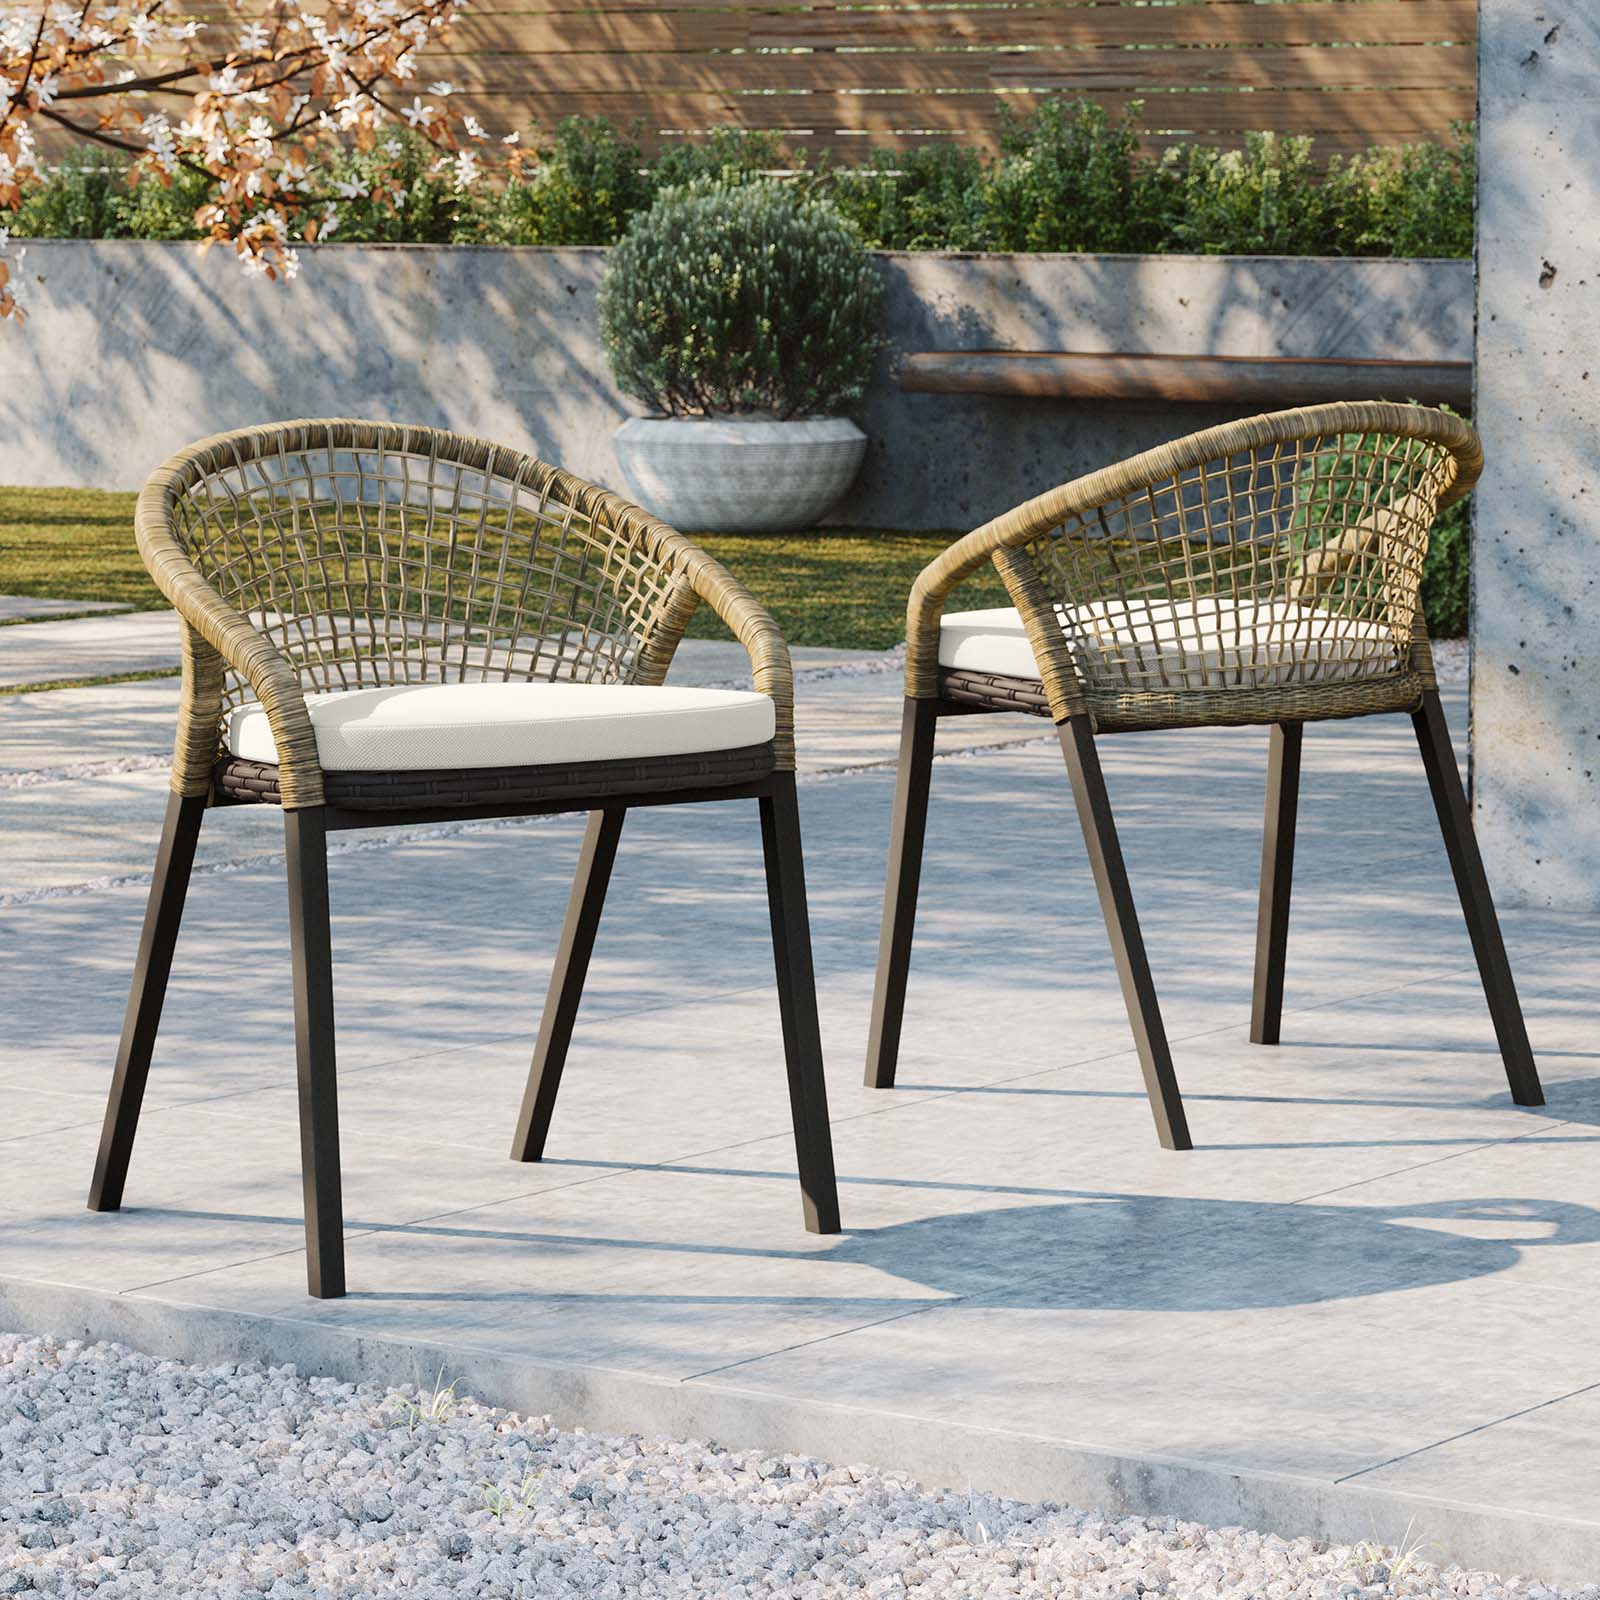 Meadow Outdoor Patio Dining Chairs Set of 2 - East Shore Modern Home Furnishings